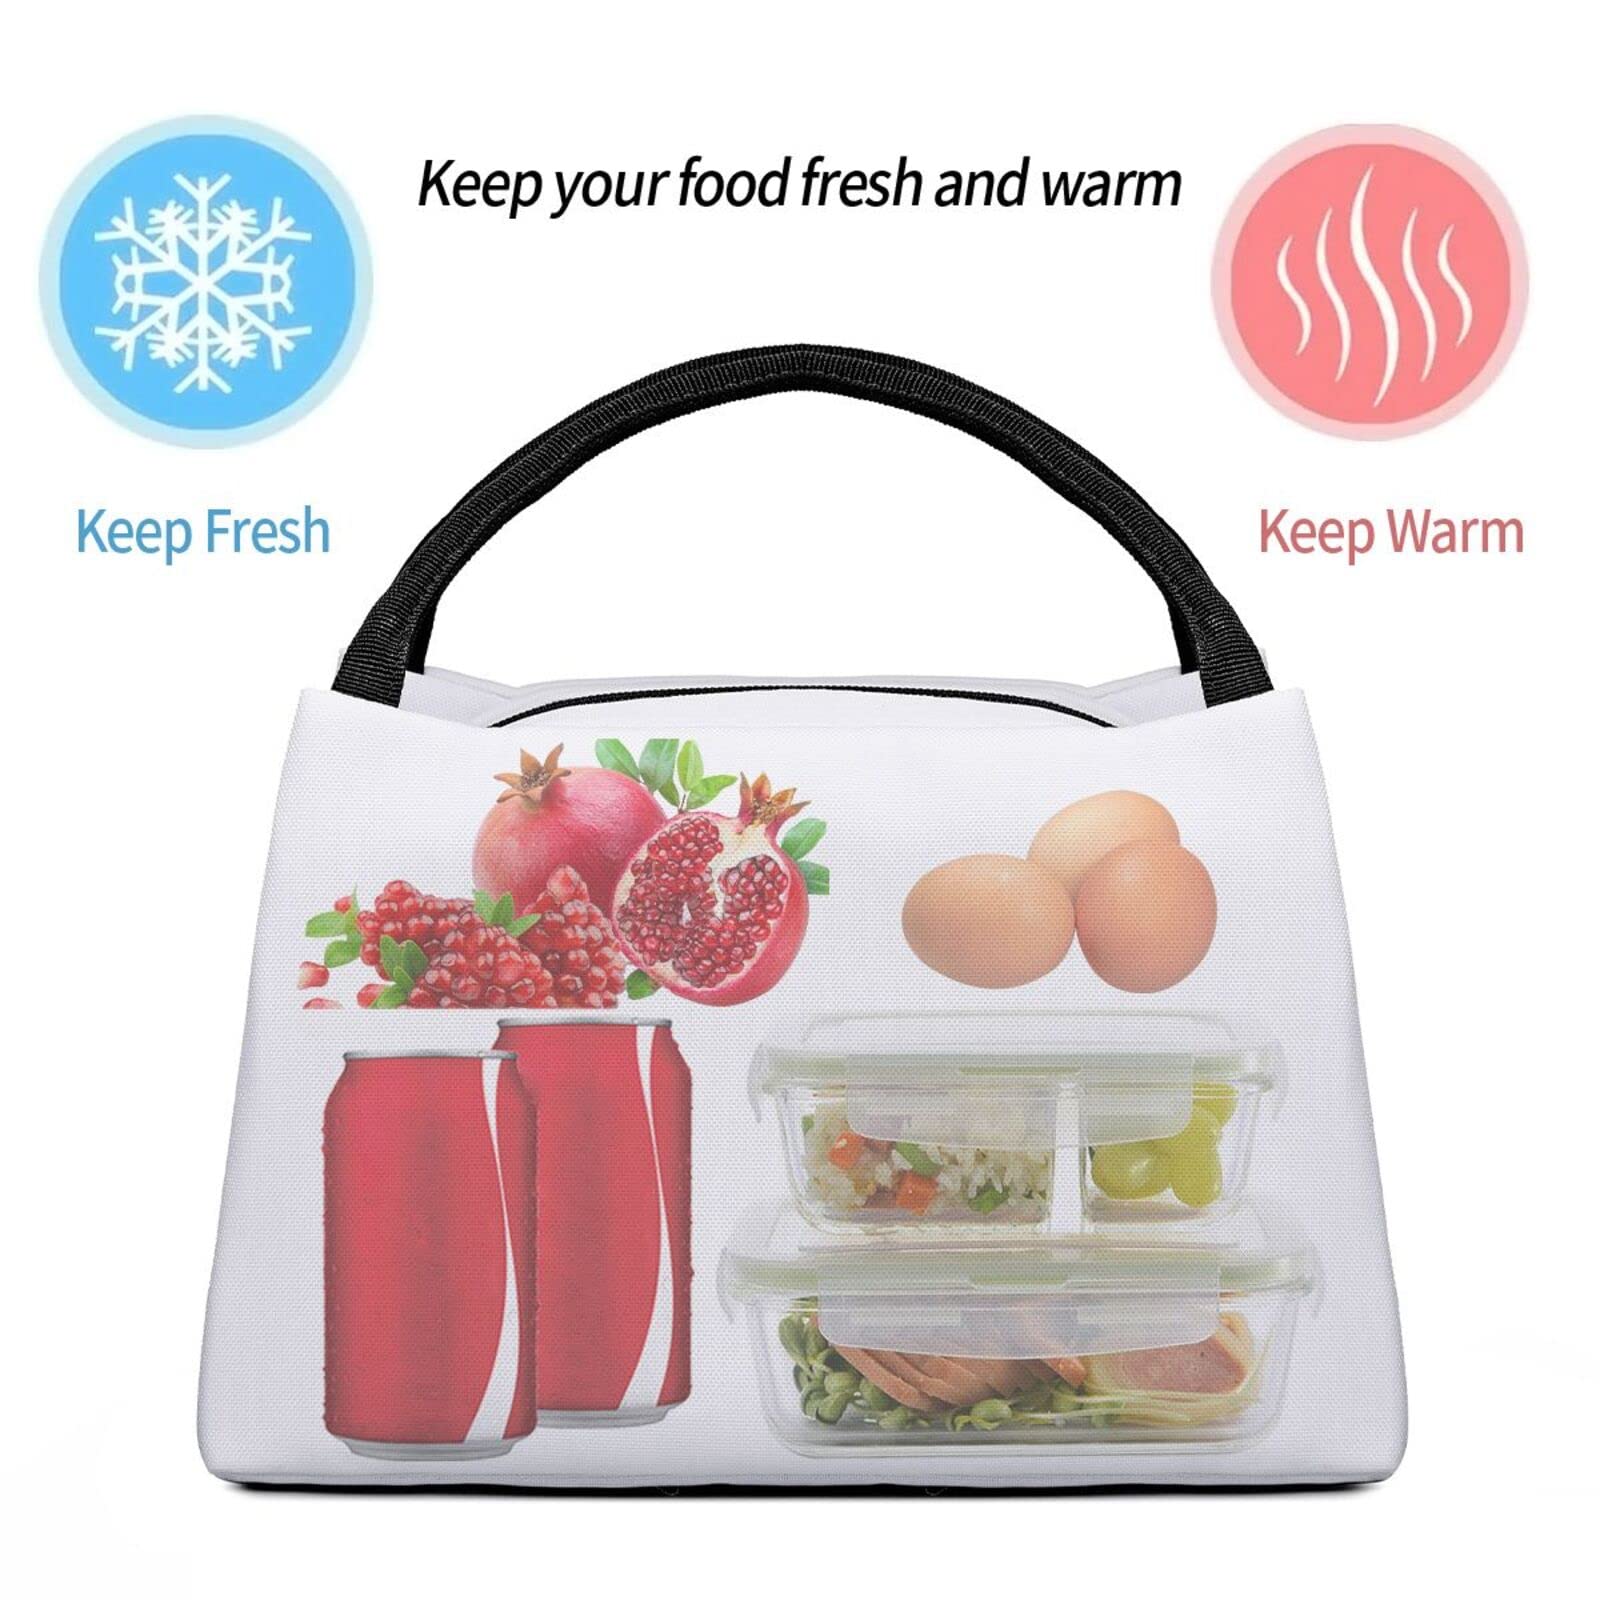 ASYG Hawaii Lunch Bag, Hawaii Tropical Floral Tote Meal Bag Lunch Holder Flower Bag for Work Outdoor Picnic